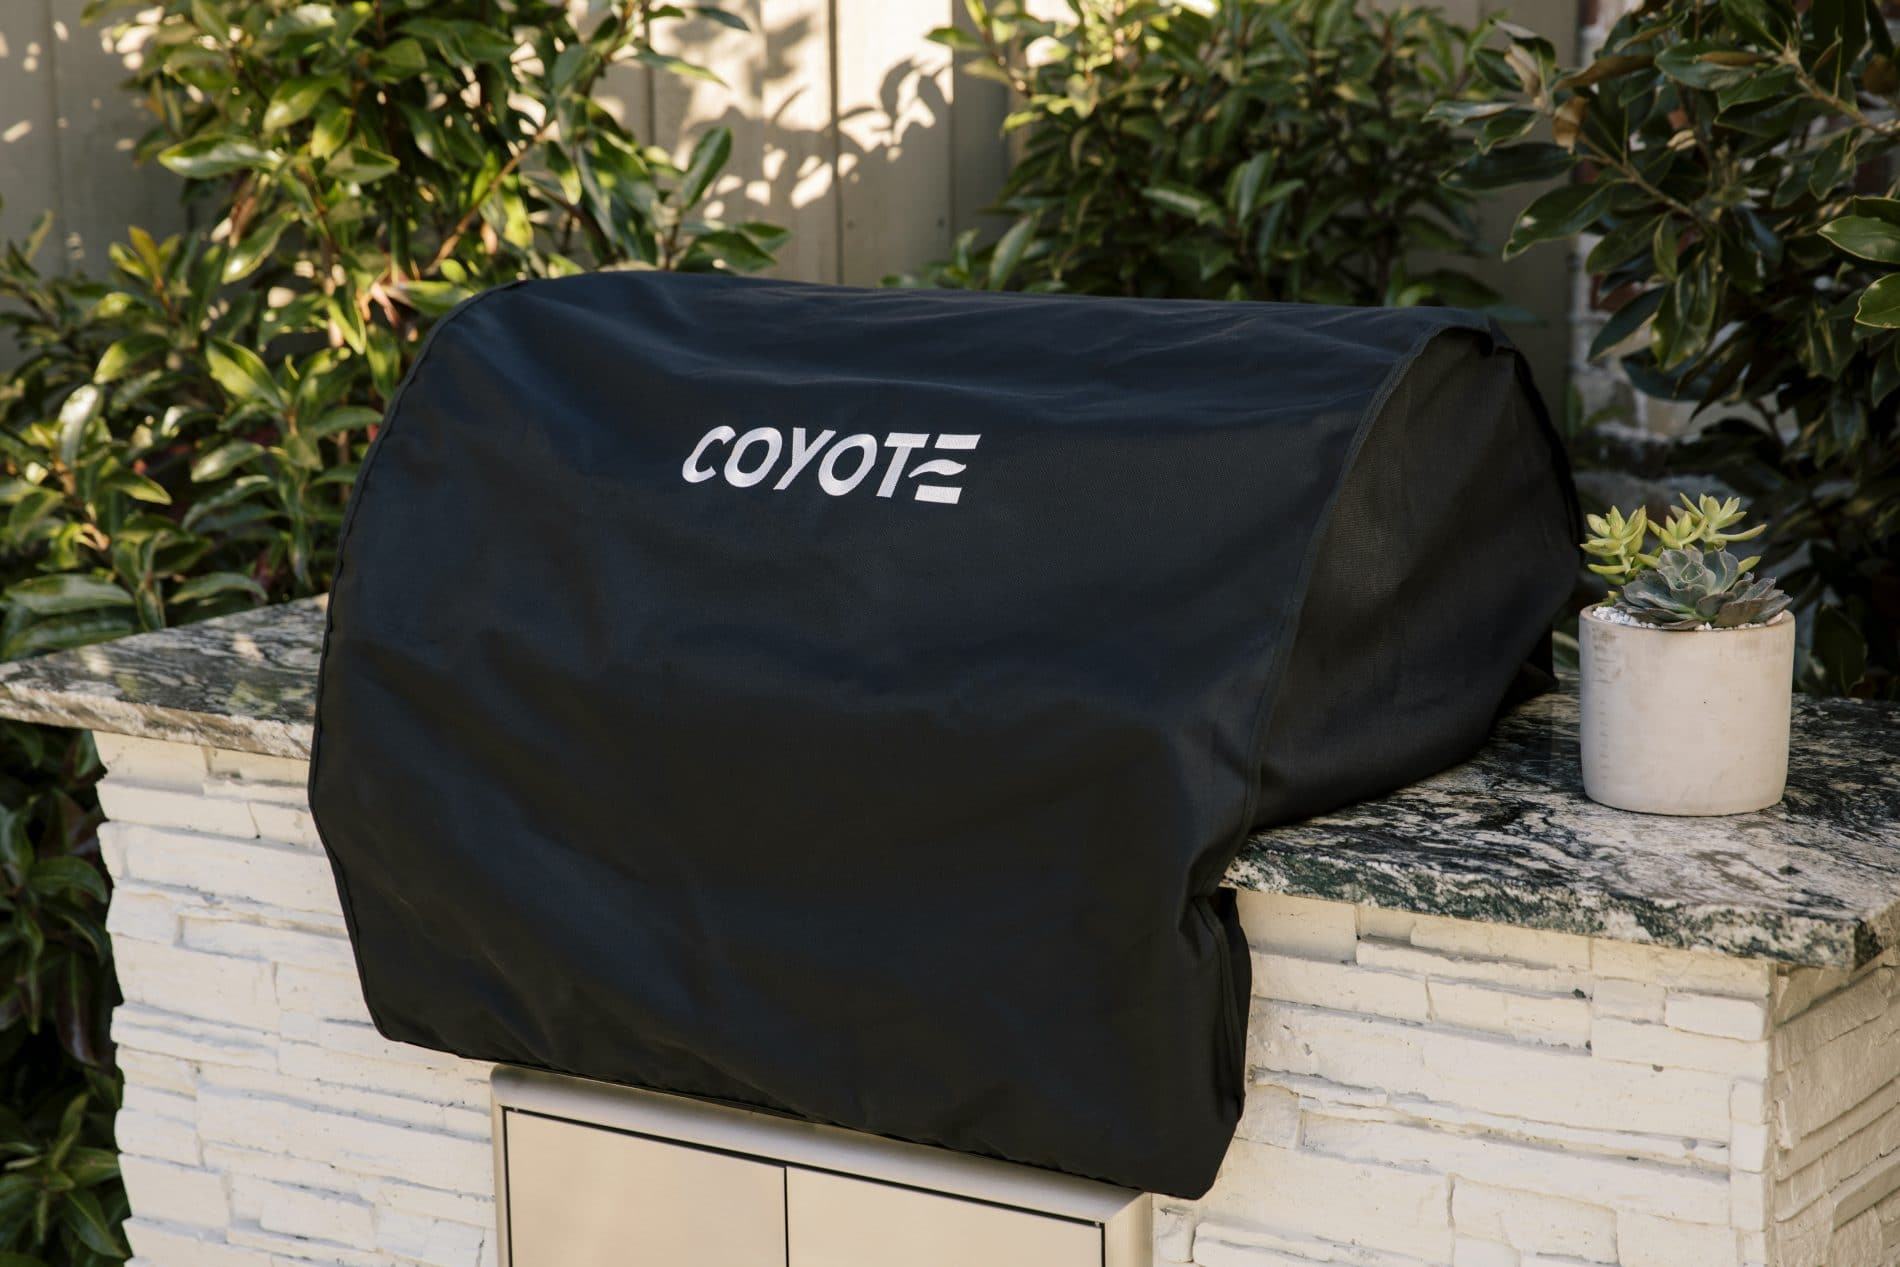 Coyote Grill Covers II - Kitchen King Direct